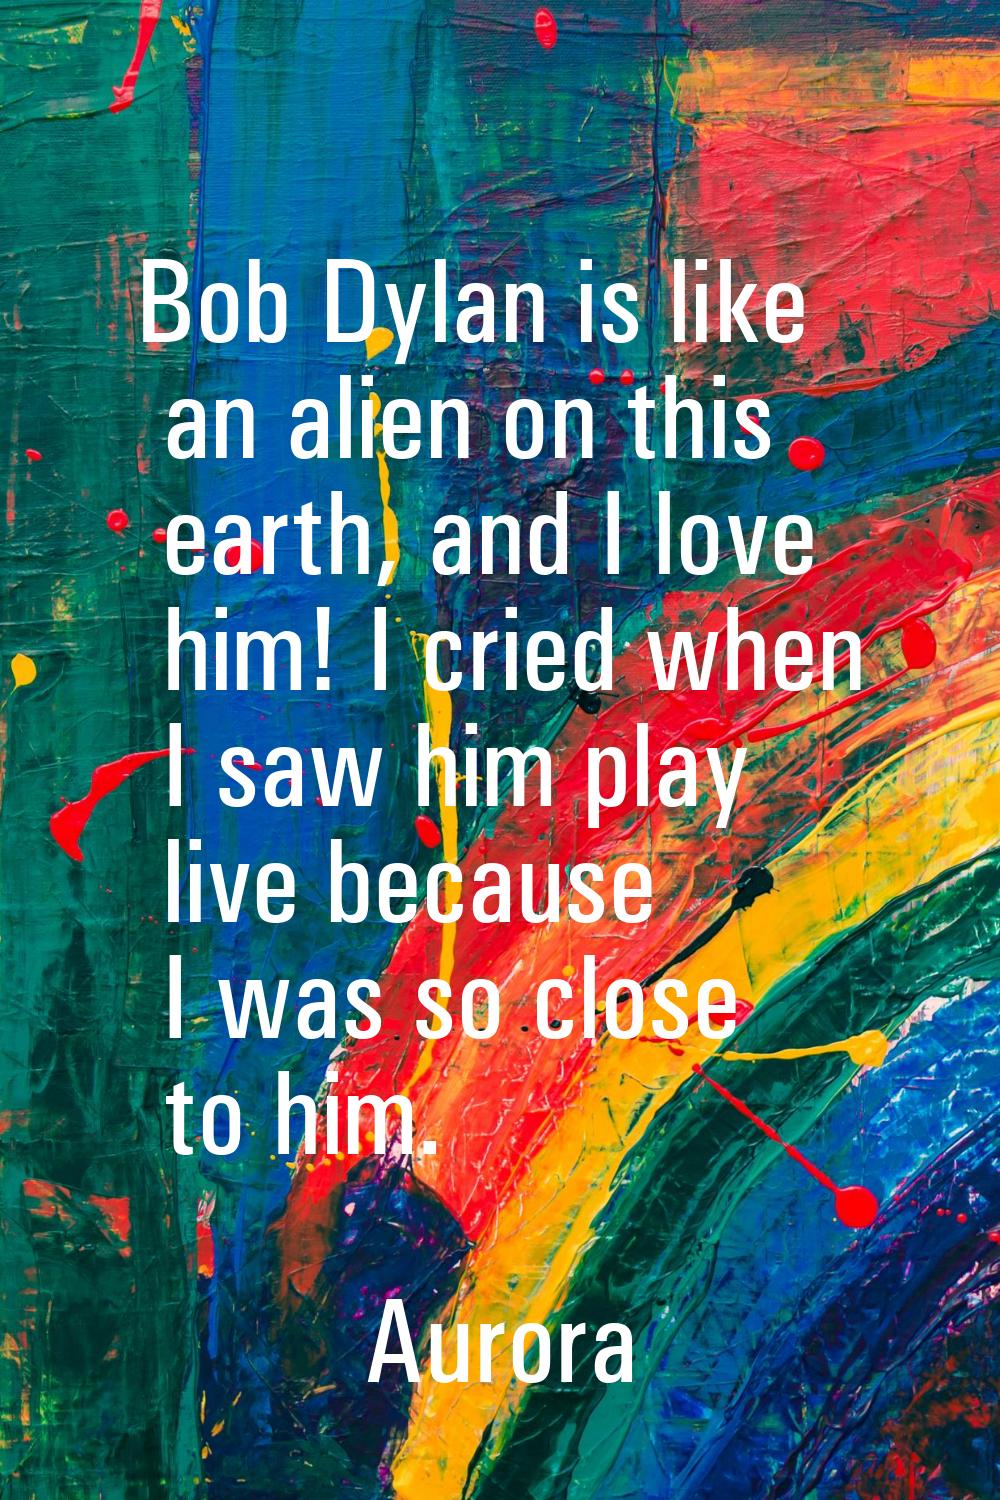 Bob Dylan is like an alien on this earth, and I love him! I cried when I saw him play live because 